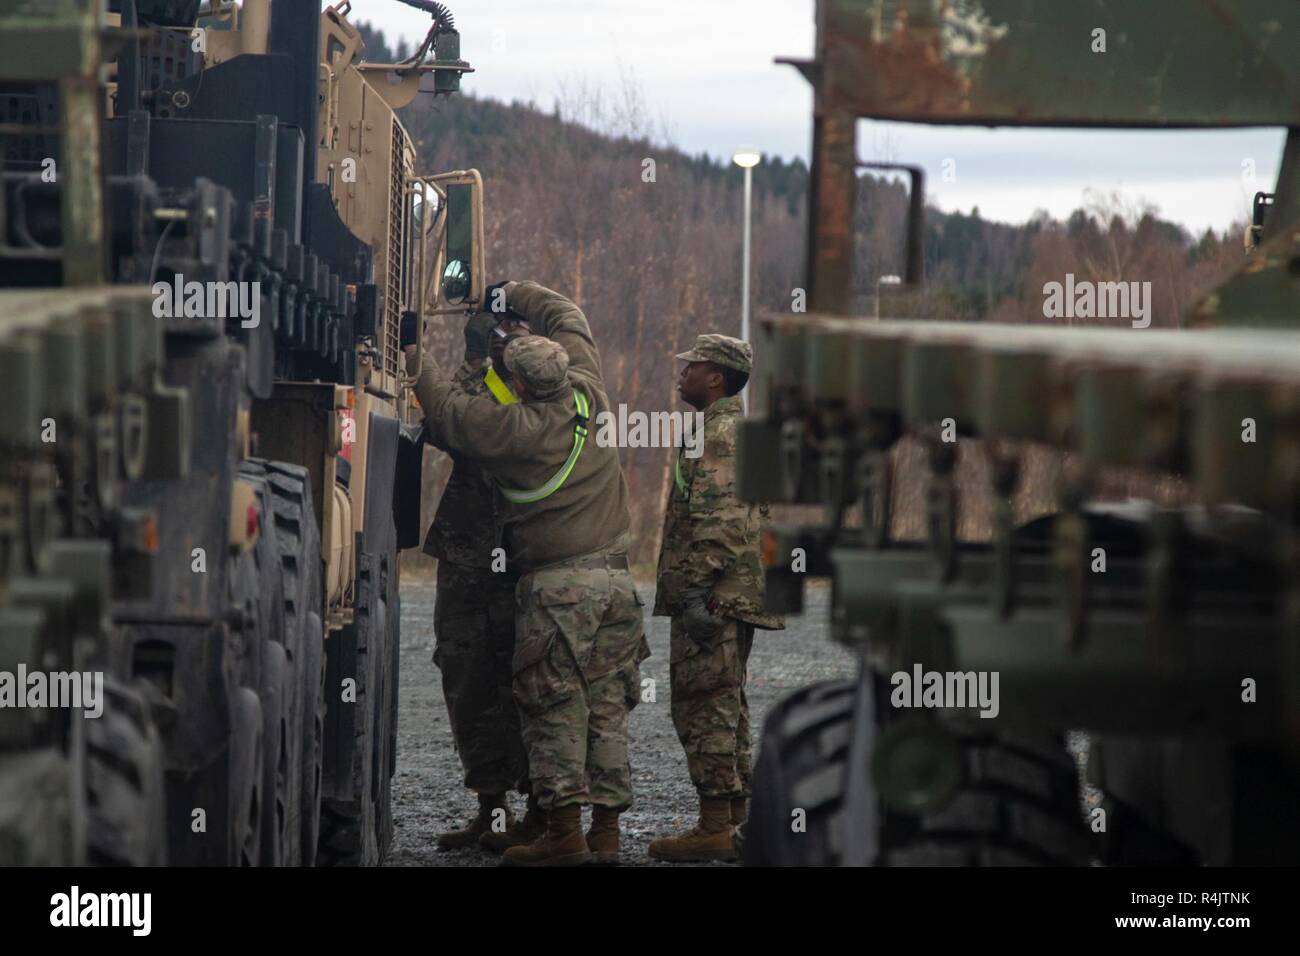 U.S. Army Soldiers assigned to the 51st Composite Truck Company, 18th Combat Sustainment Support Battalion, 16th Sustainment Brigade, fix a broken mirror during Exercise Trident Juncture 18, at Levanger, Norway, Oct. 31, 2018.    Trident Juncture 18 is a comprehensive exercise promoting interoperability and cohesion between the United States and its European Allies and partners to enhance readiness and ensure the continued peace and stability in the region. Stock Photo